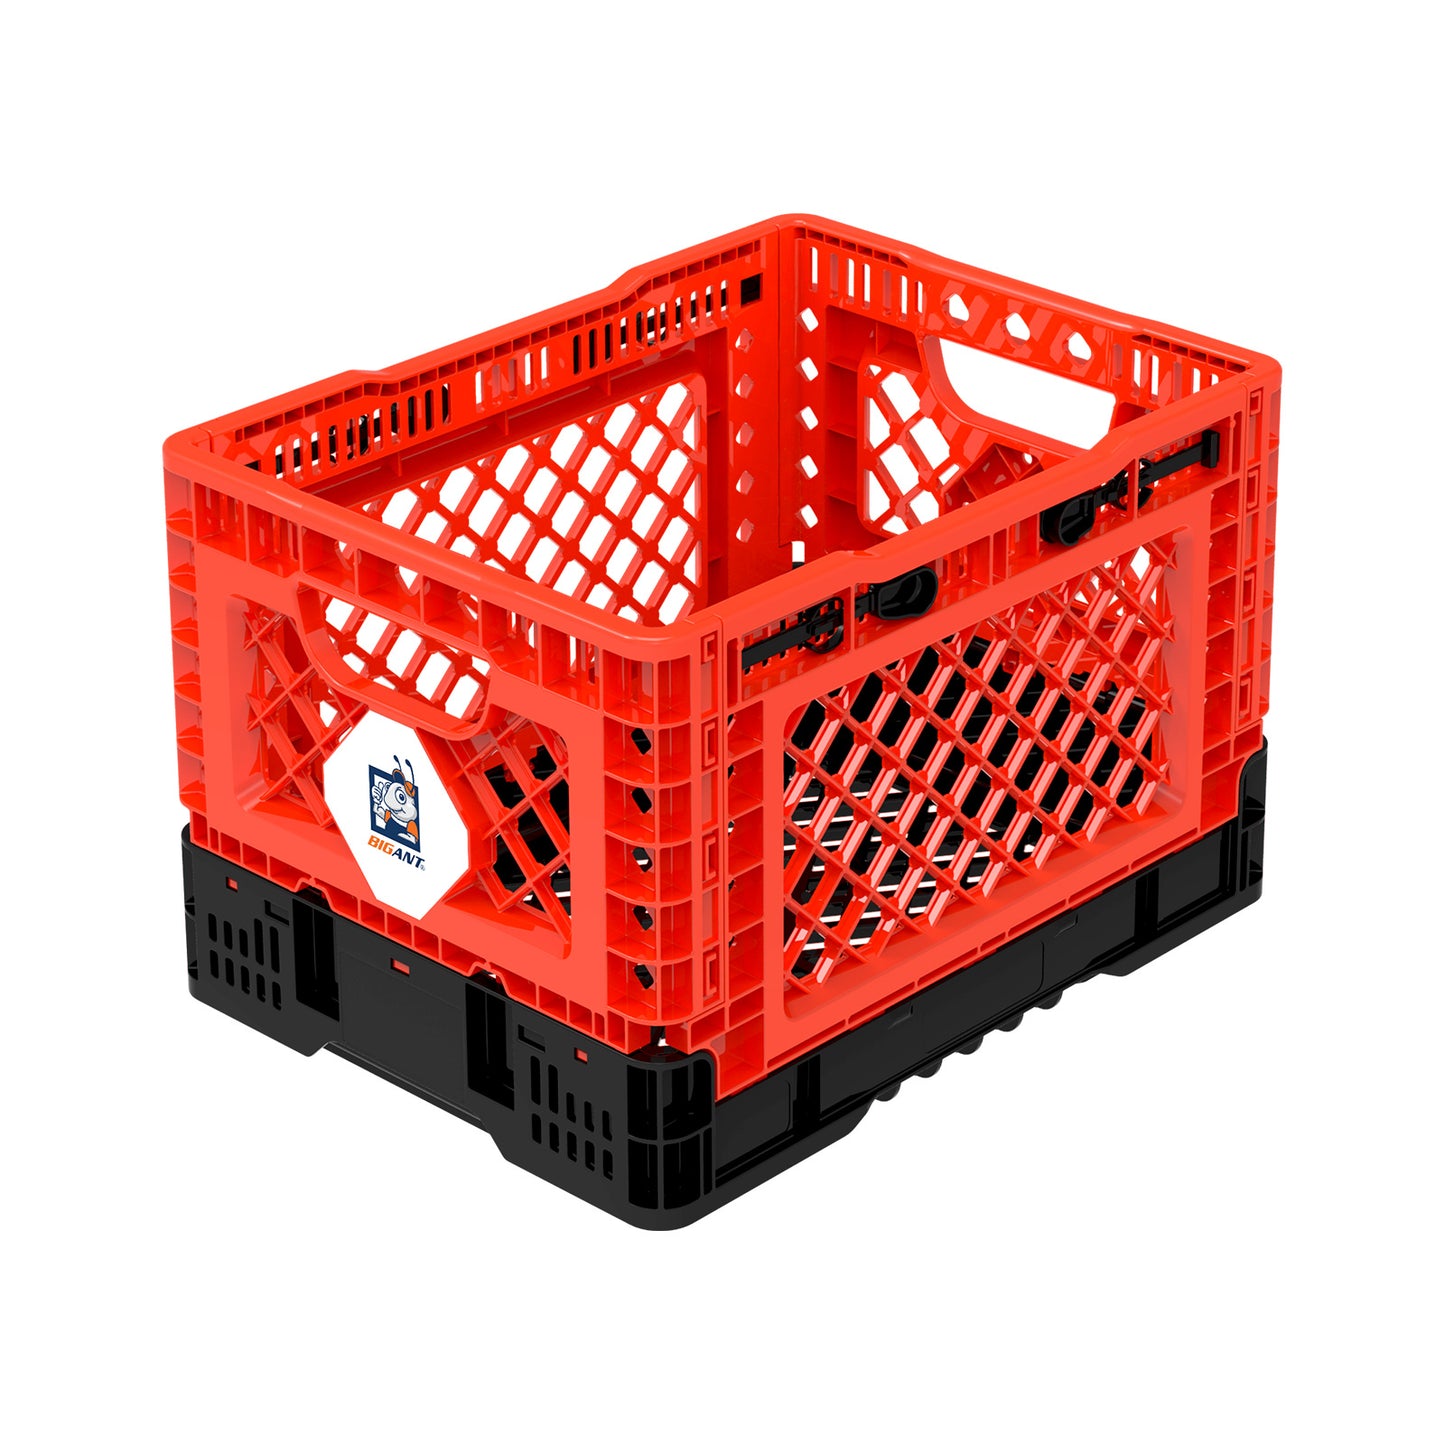 BigAnt Smart Foldable Stackable Crate 25L - Red